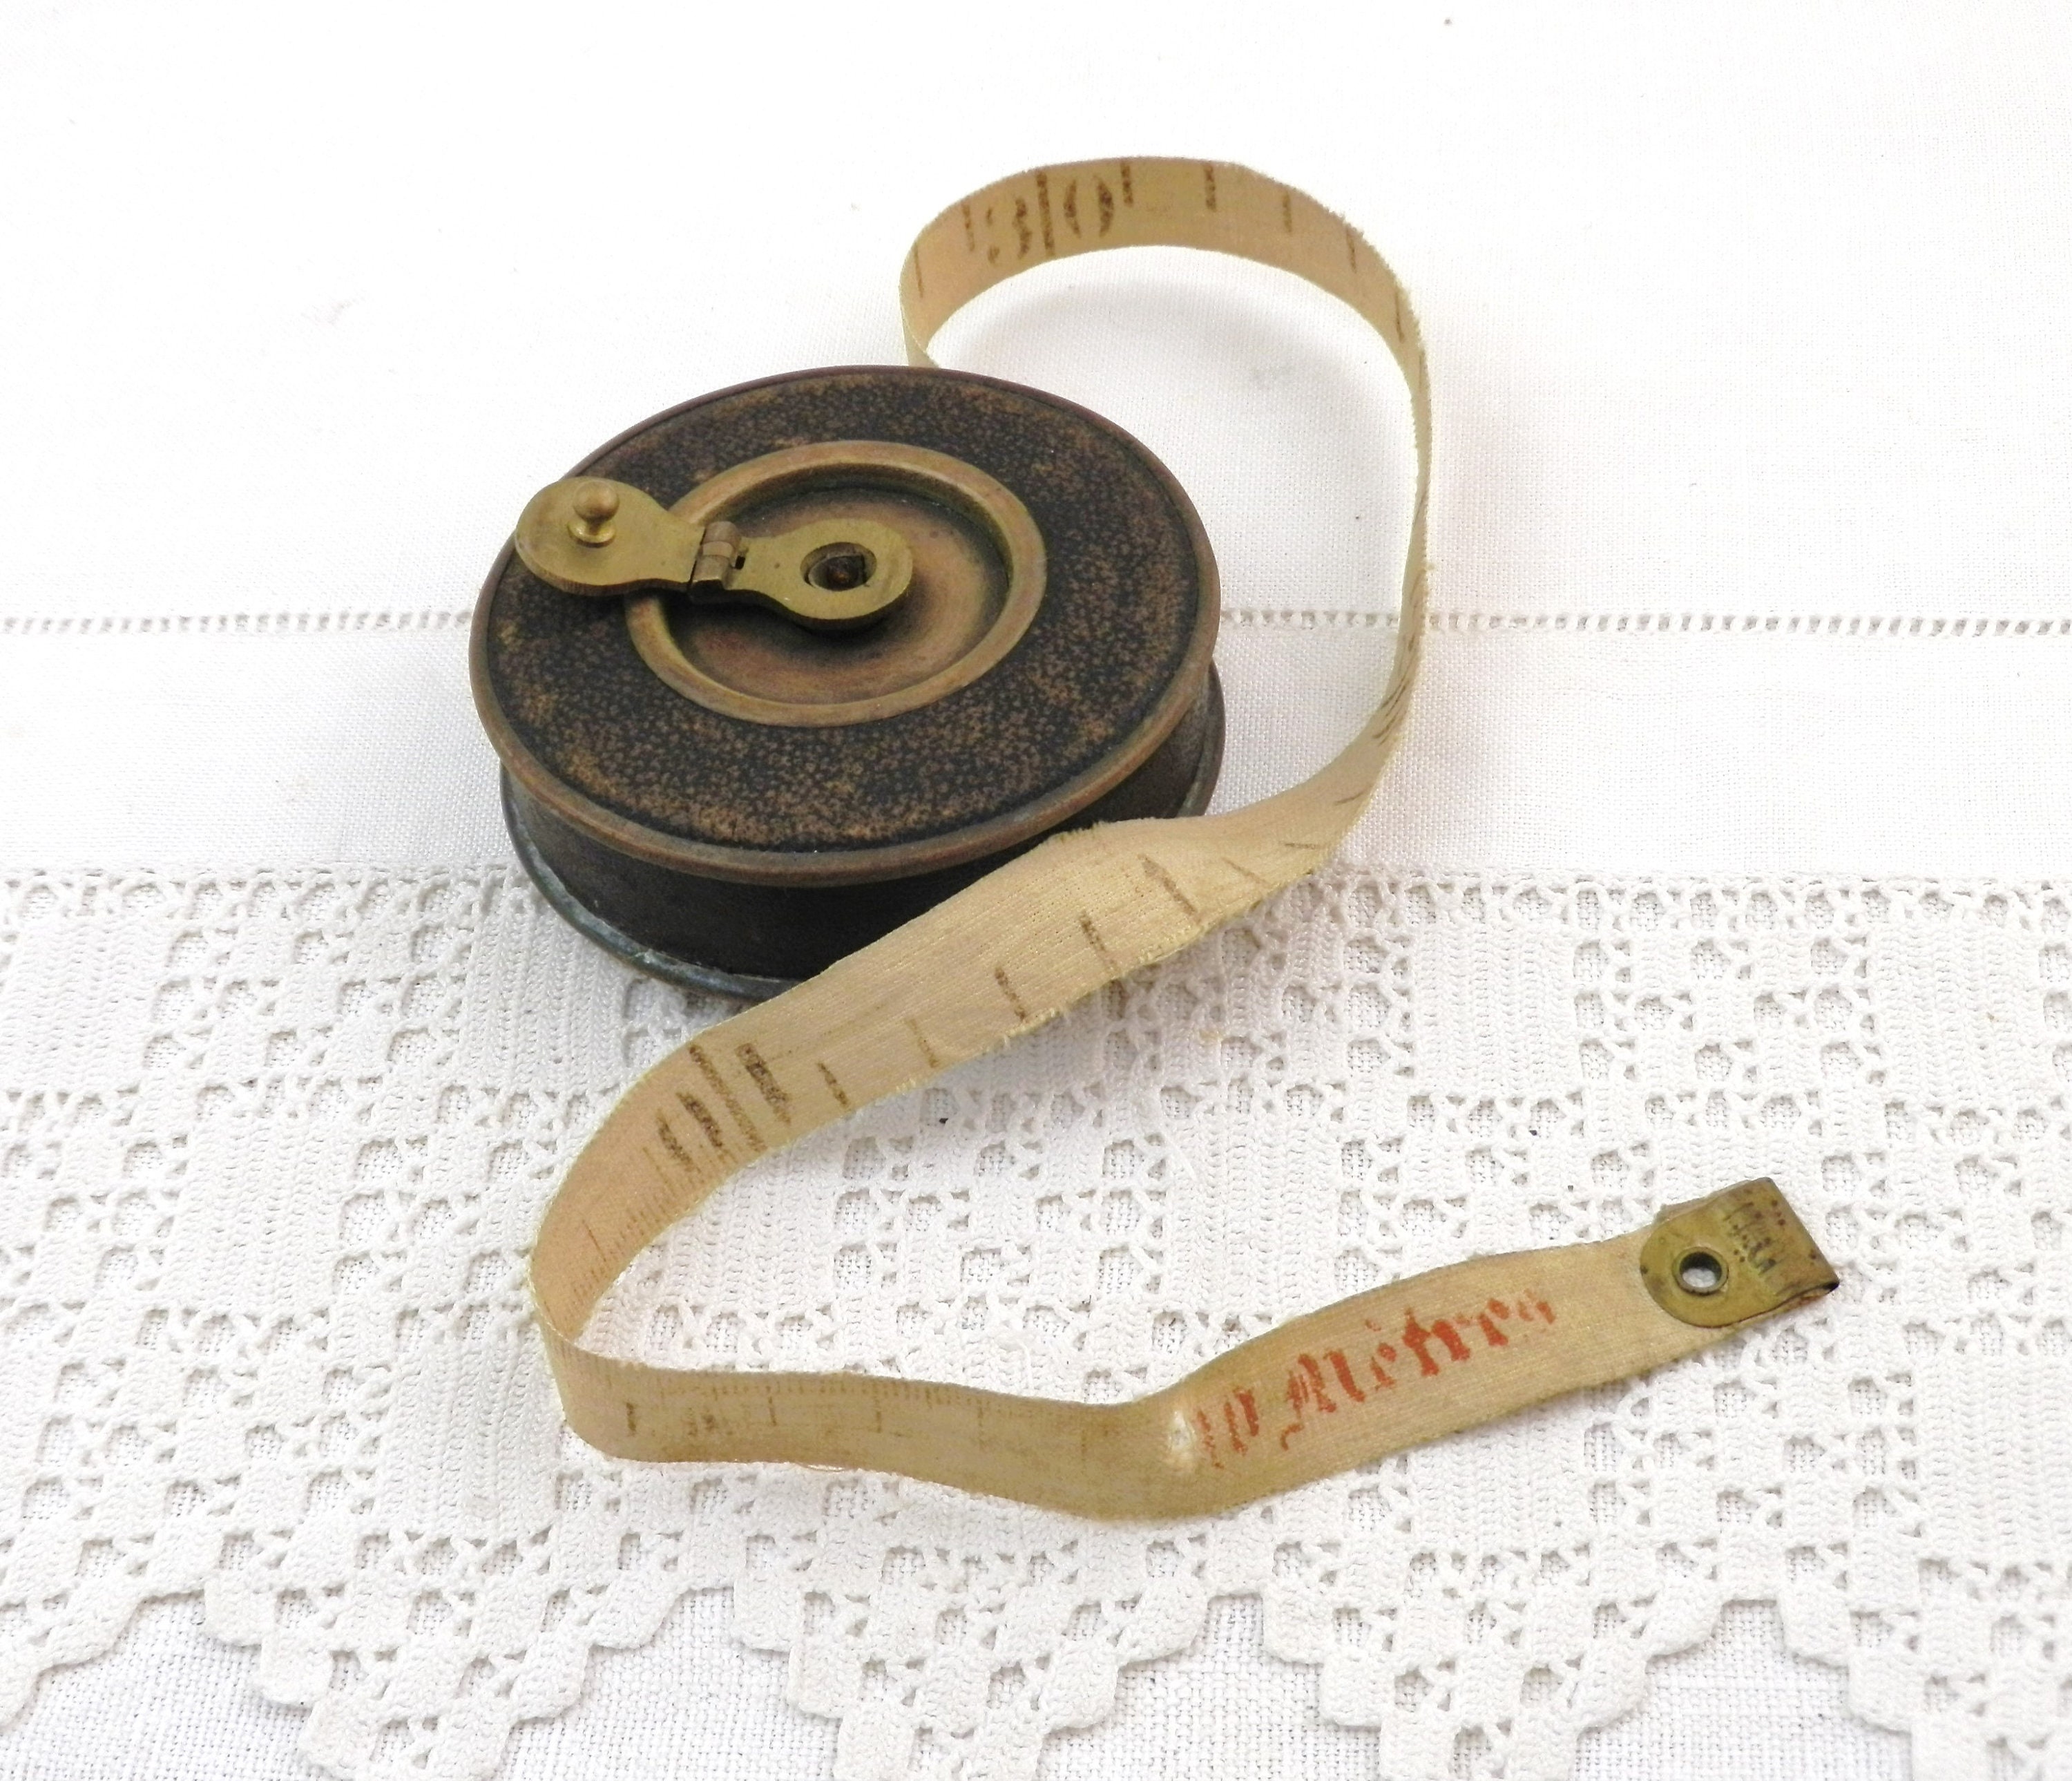 Vintage, Circa 1950's Cloth Tape Measure, 'Swordfish Brand' in Brown  Leather Case with Brass Rewind